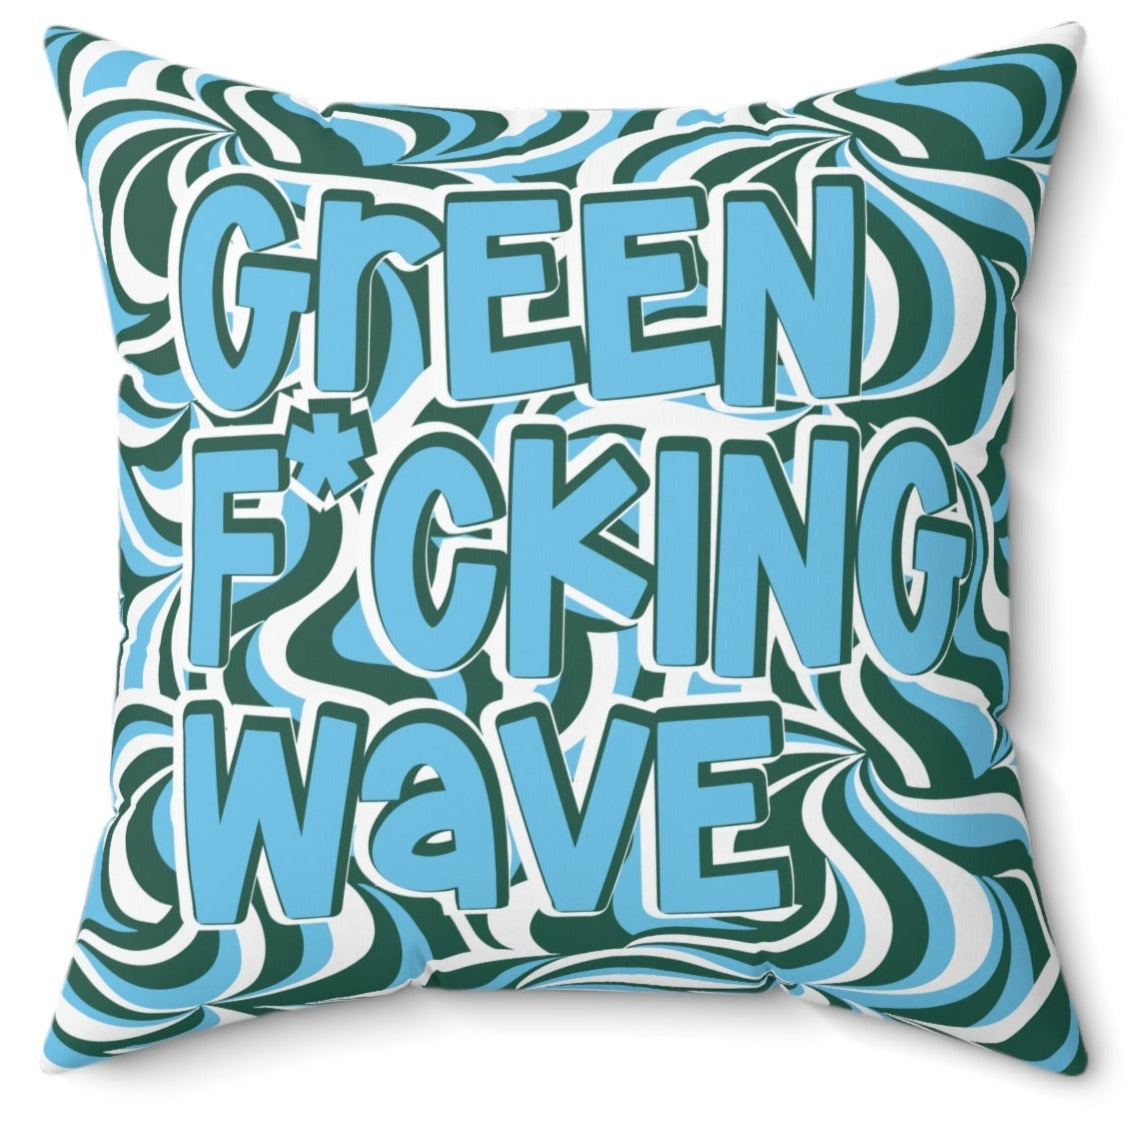 Green F*cking Wave Bed Party Pillow Cover